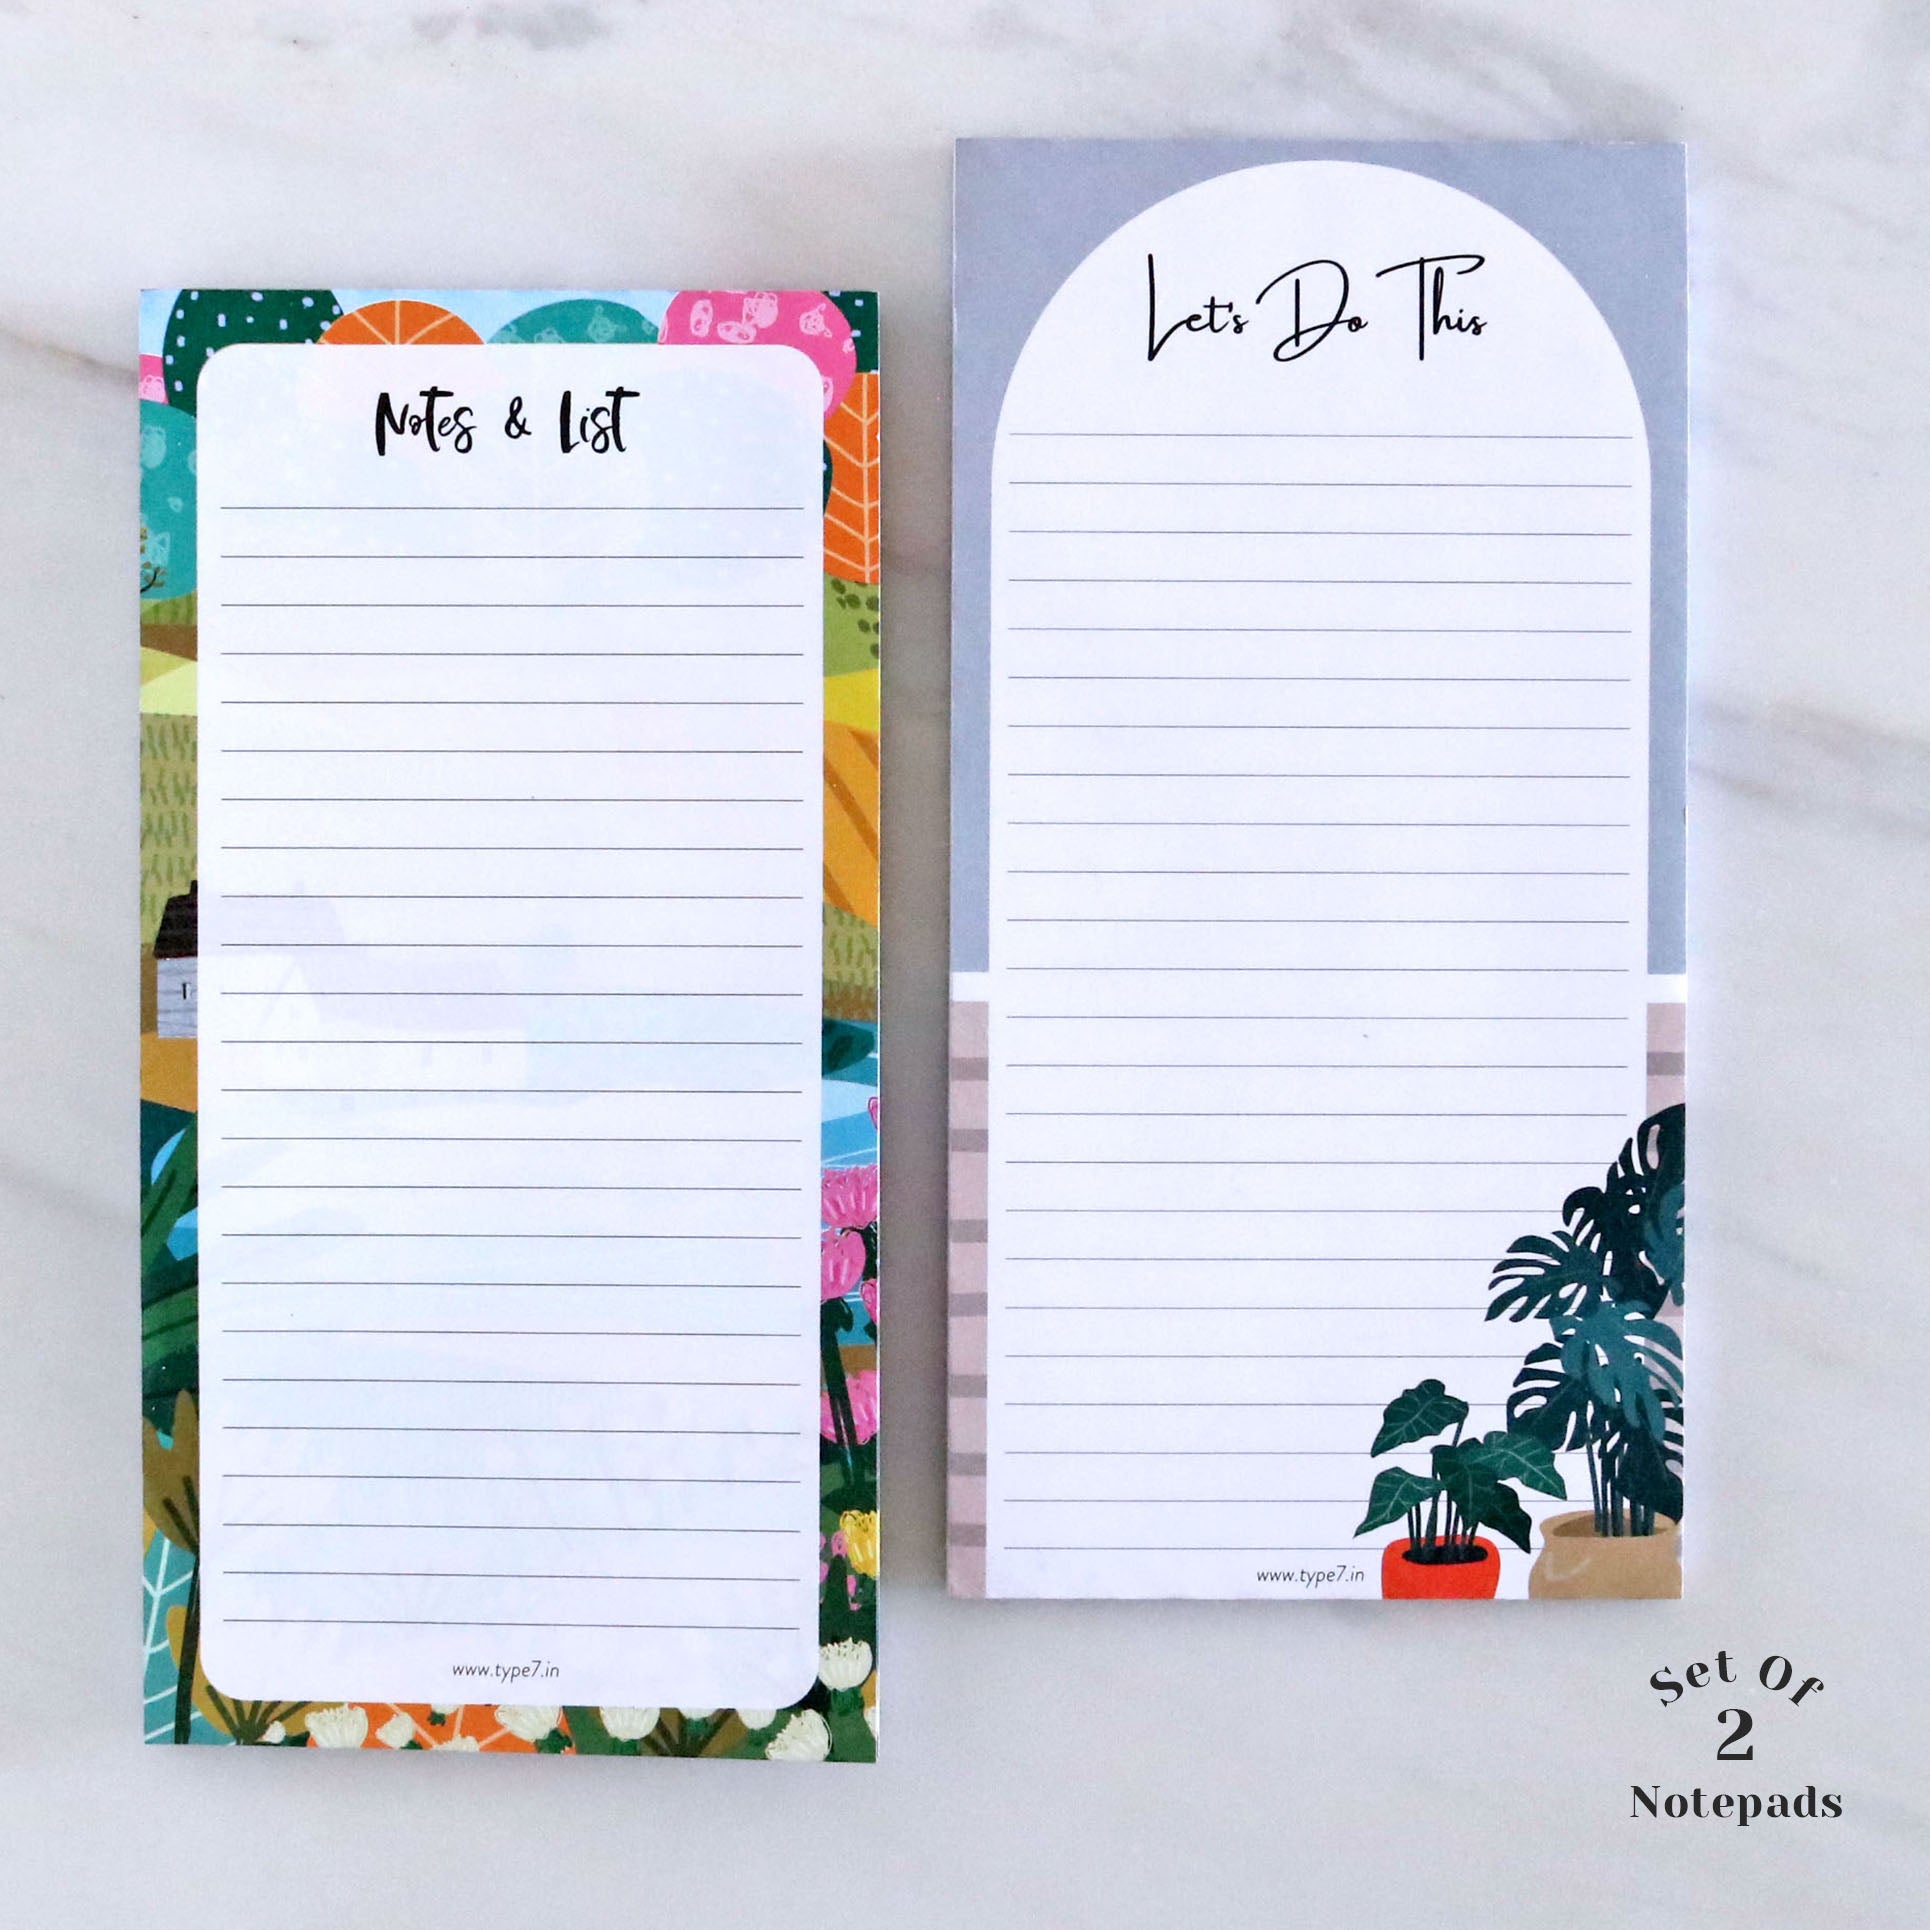 Set of 2 Notepads - Notes & List & Let's Do This